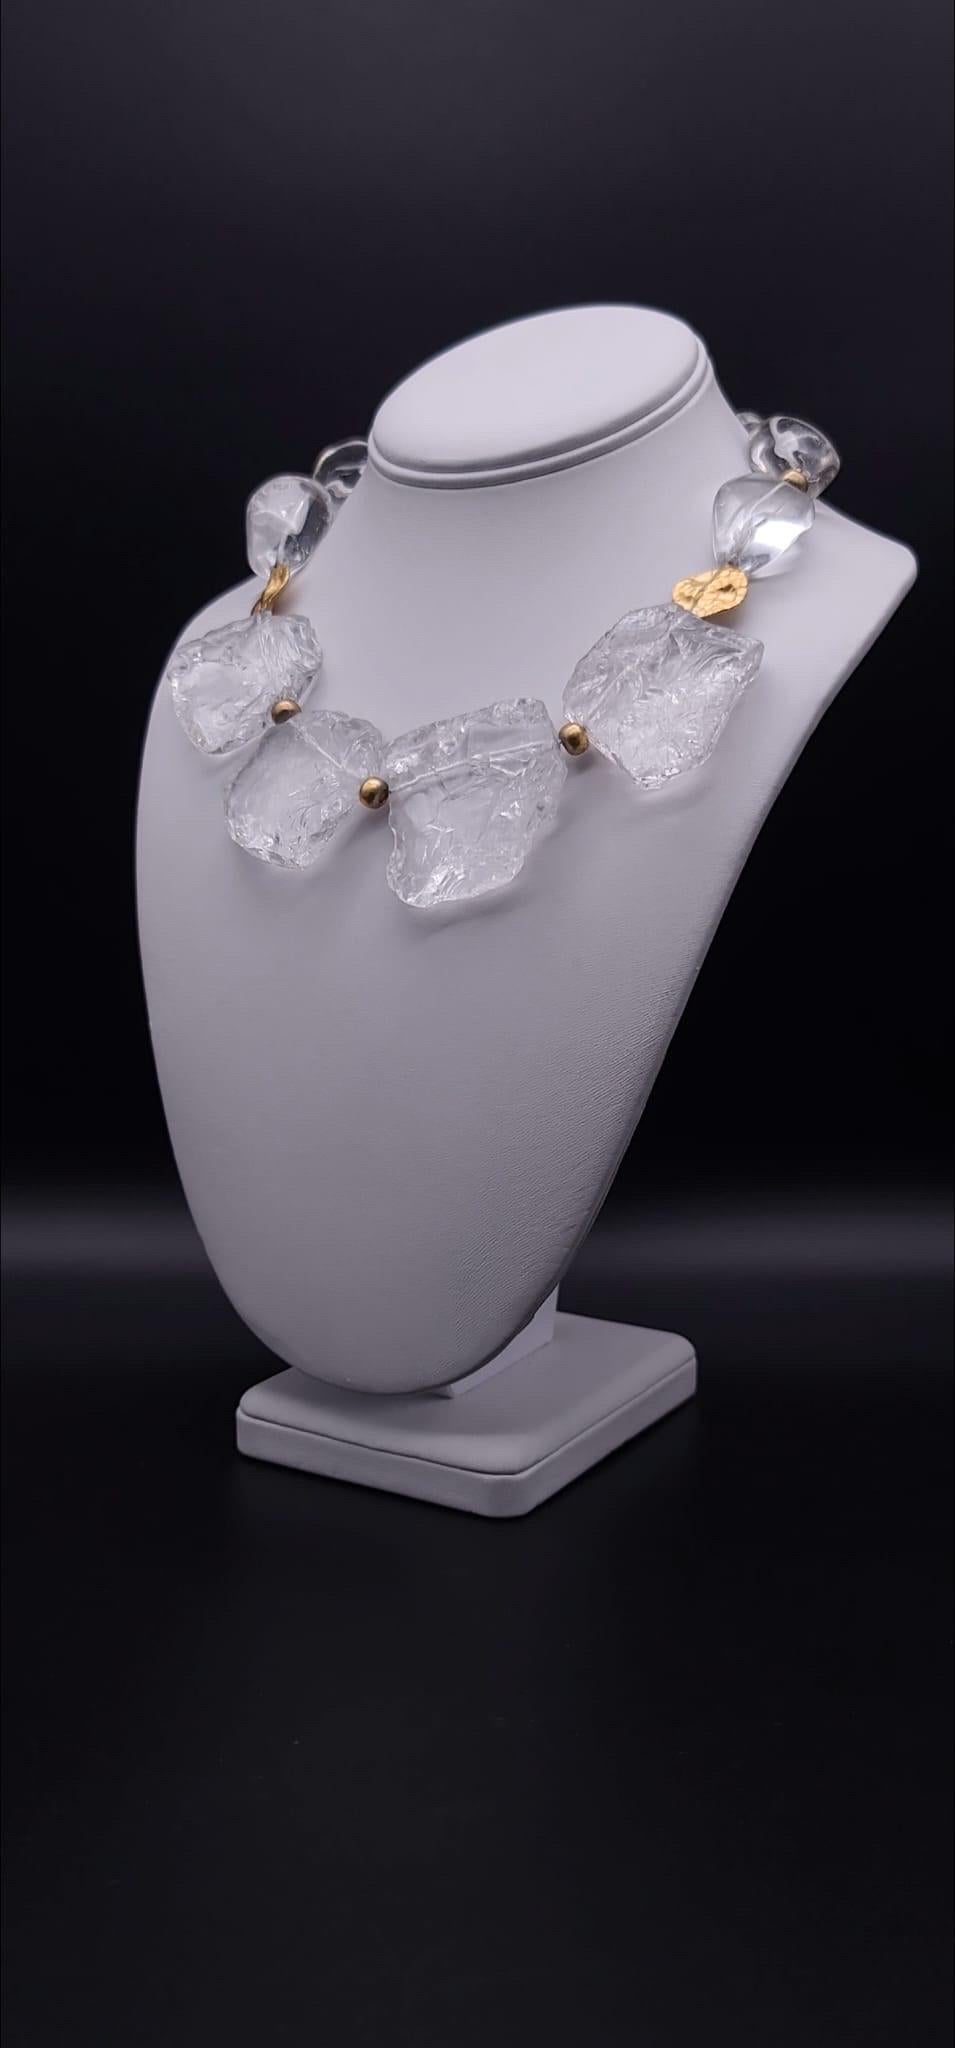 One-of-a-Kind

Fire and ice best describe this dramatic necklace of hammered rock crystal plates and clear polished Quartz beads. The icy look of the stones is accented by vermeil ( 22k over sterling silver) spacers as well as 2 hand-crafted